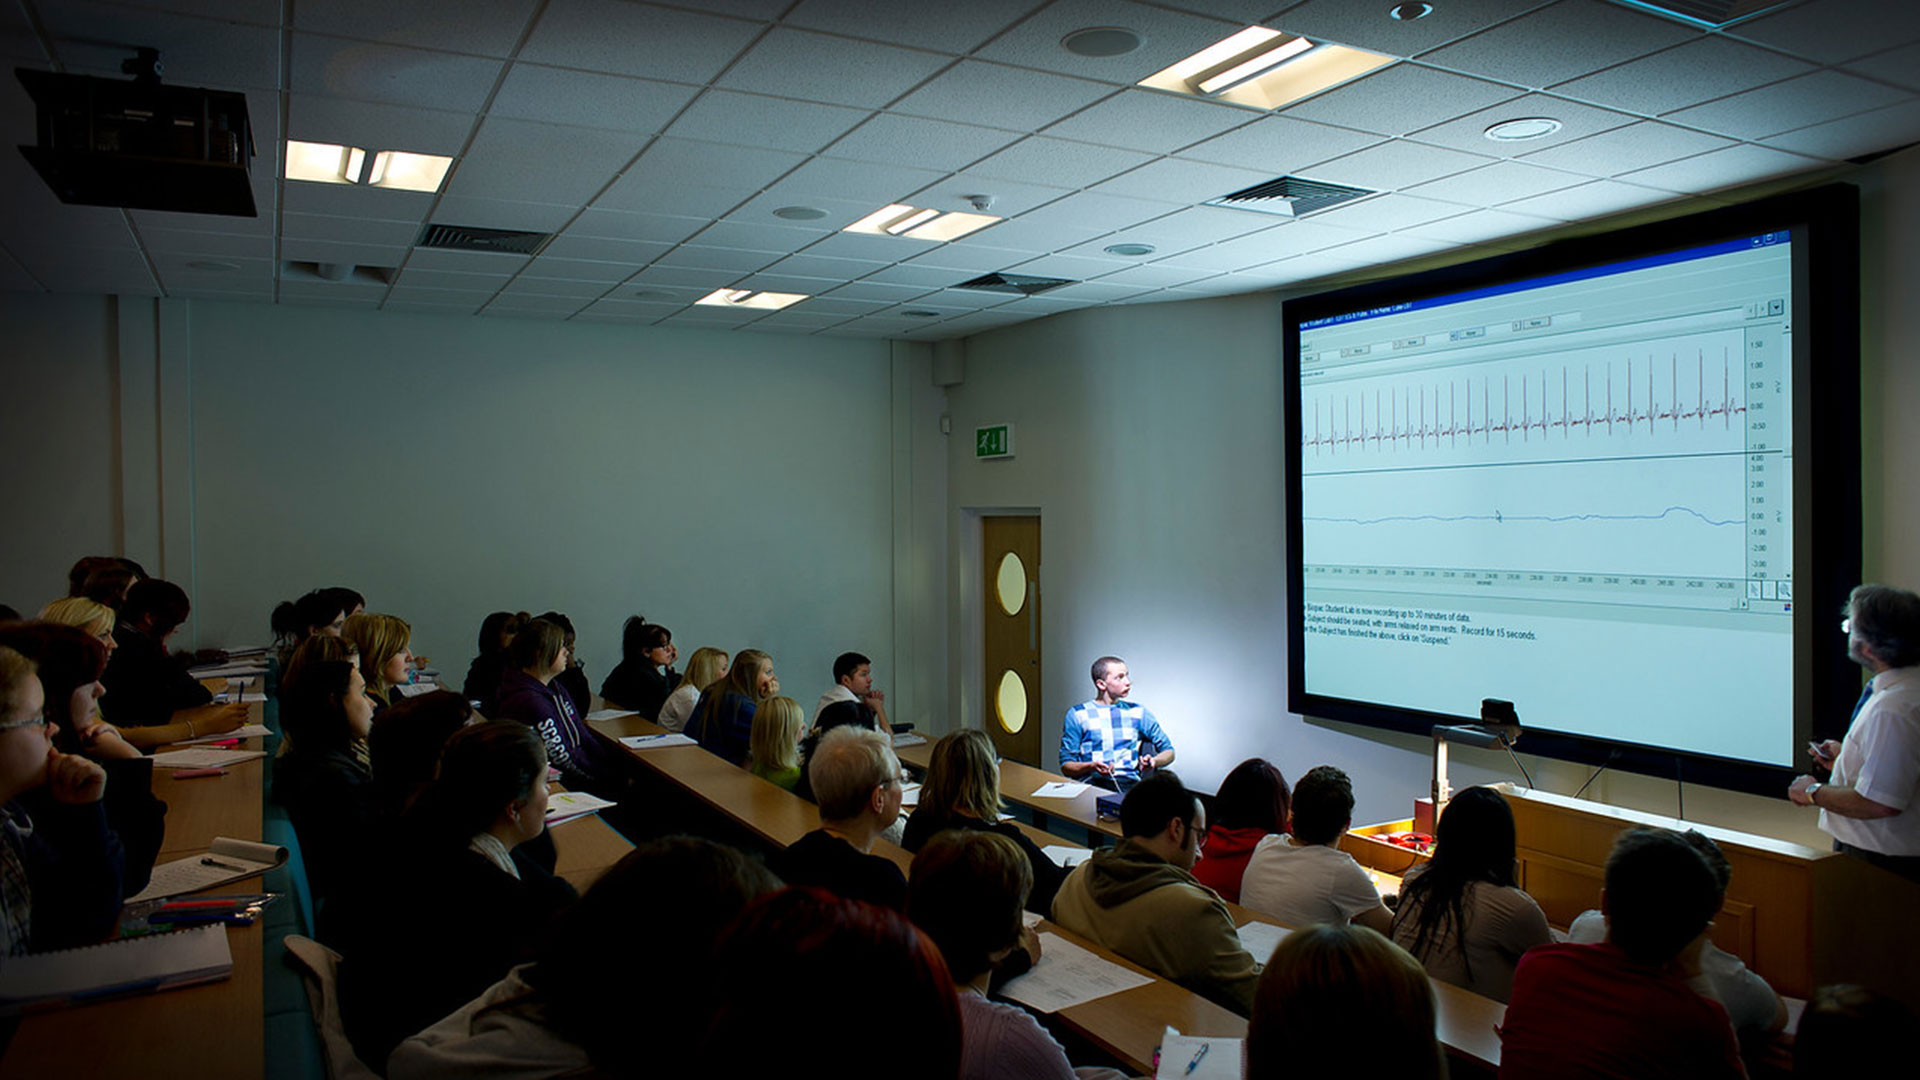 Two academics teaching a lecture theatre full of students. There is a smartboard displaying lecture content that they are looking at.